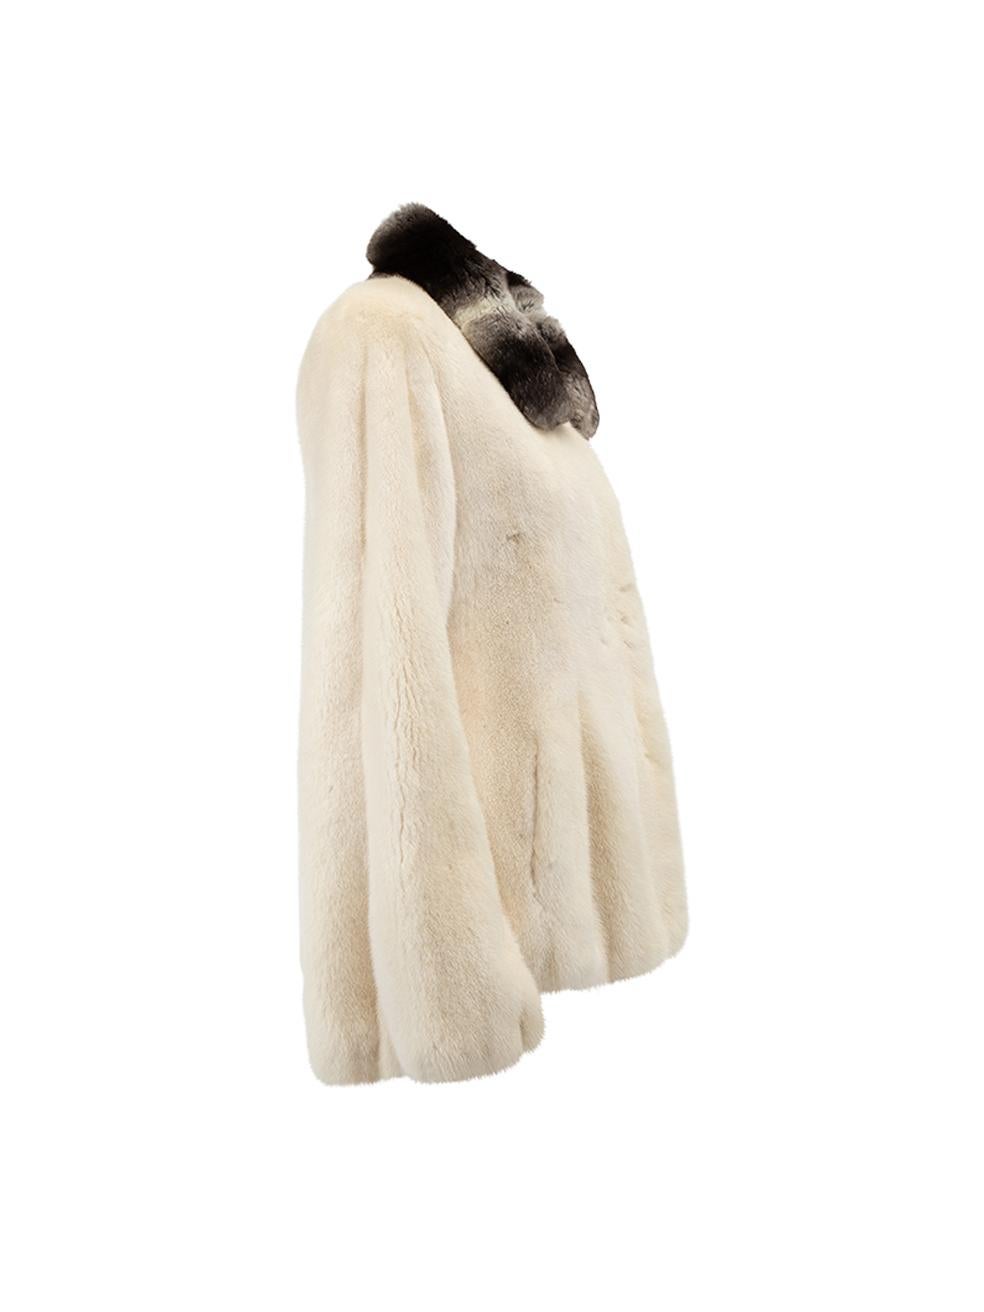 CONDITION is Very good. Minimal wear to jacket is evident. Minimal wear to the top button which is loose and looks a little worn on this used Mala Mati designer resale item. Details Cream Mink fur Single breasted coat Mid length Turn clasp and eye